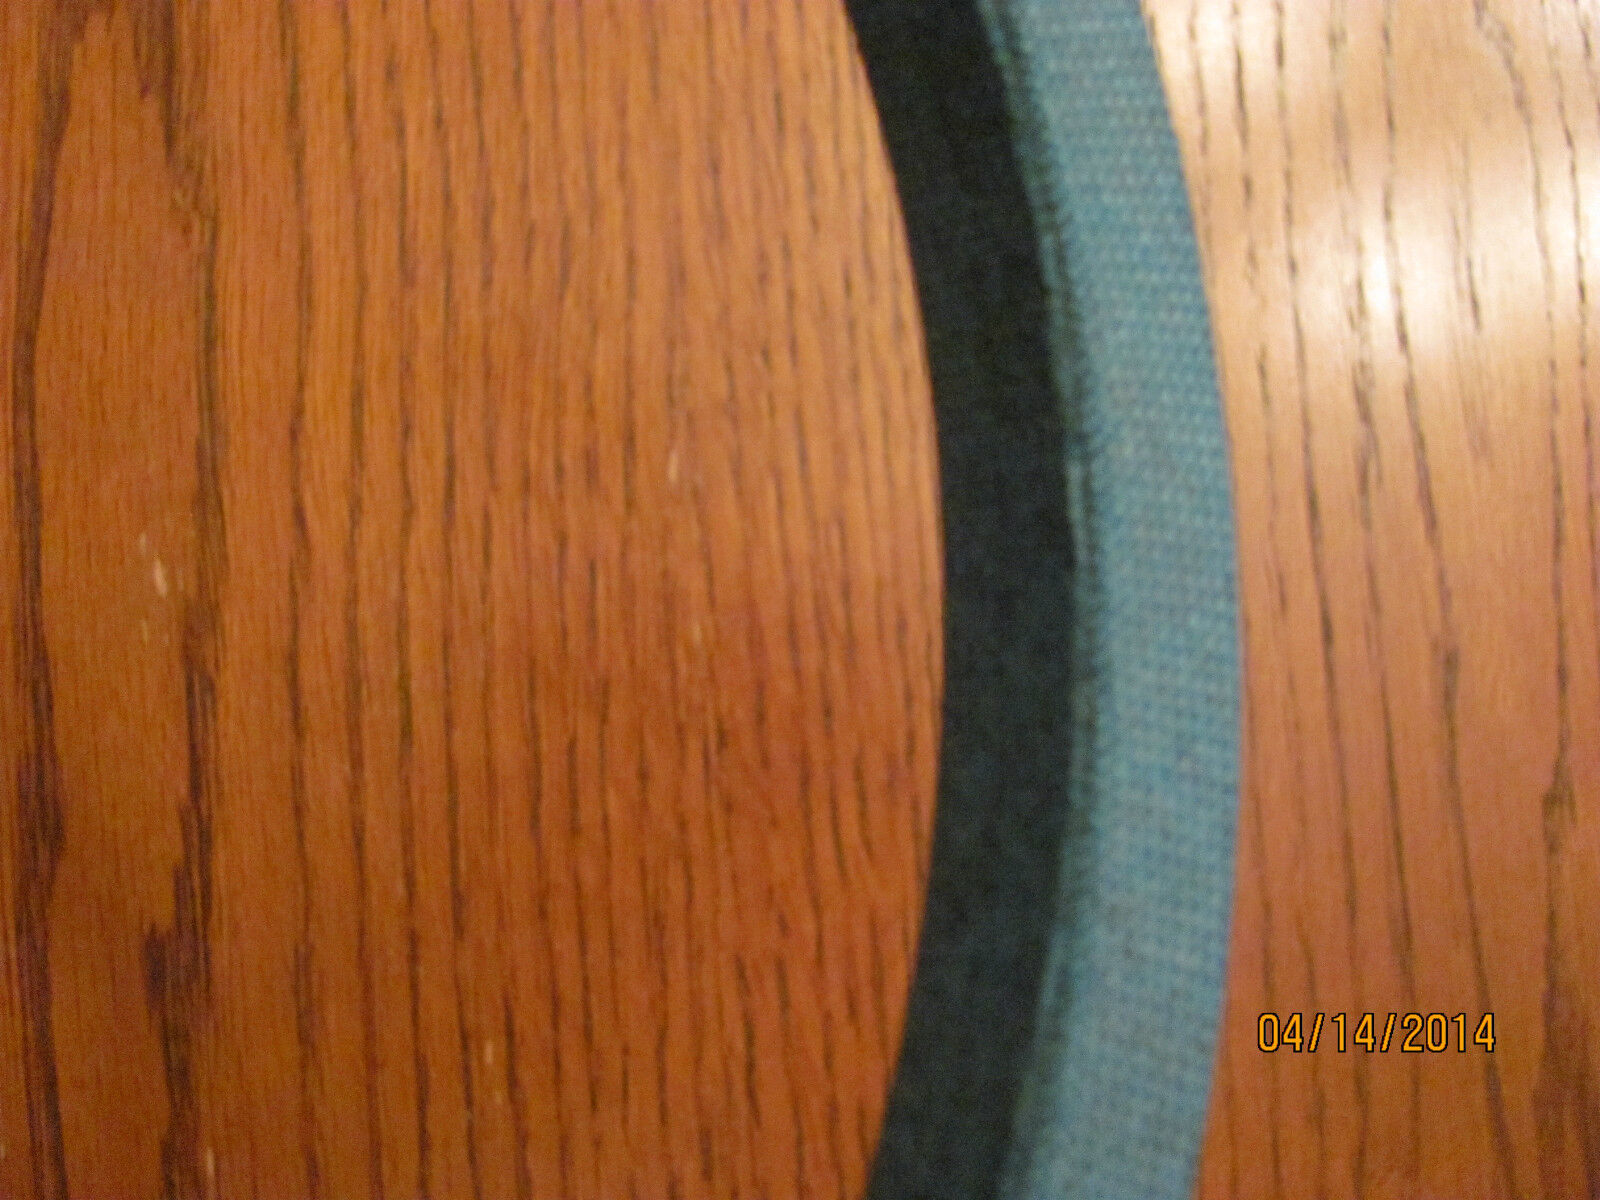 ARAMID REPLACEMENT BELT FOR KING KUTTER OR COUNTY LINE 167108 ALL 4' RFM-48 - 0